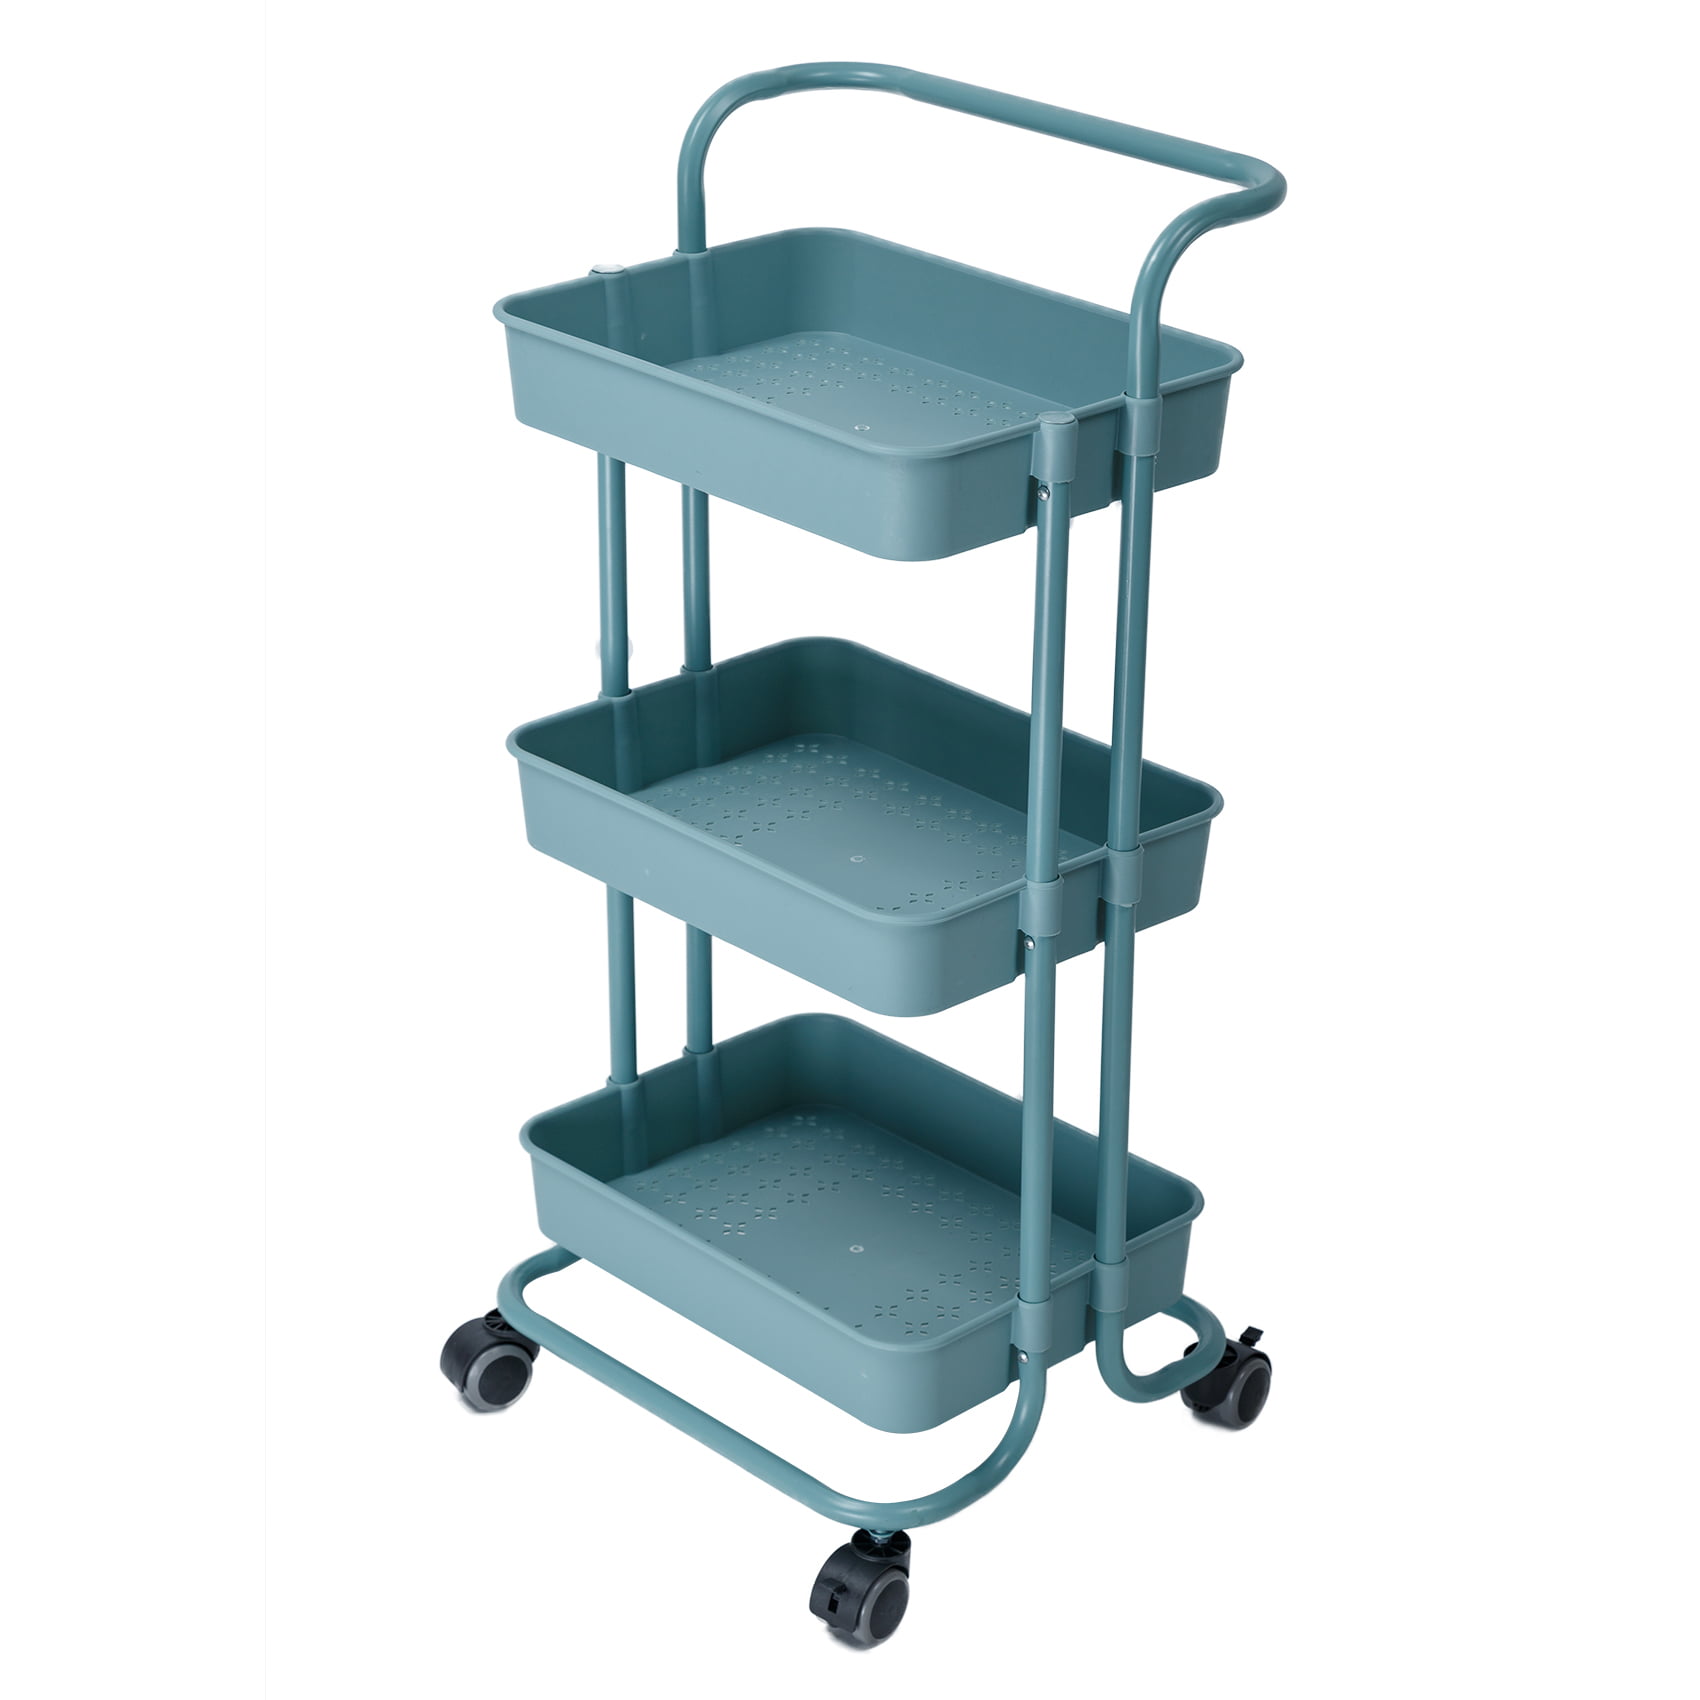 Black Ceeyali 3-Tier Utility Rolling Cart Storage Organizer Shelf Multifunction Storage Cart with Handle and Lockable Wheels for Home Kitchen,Bathroom,Office,Laundry Room etc.